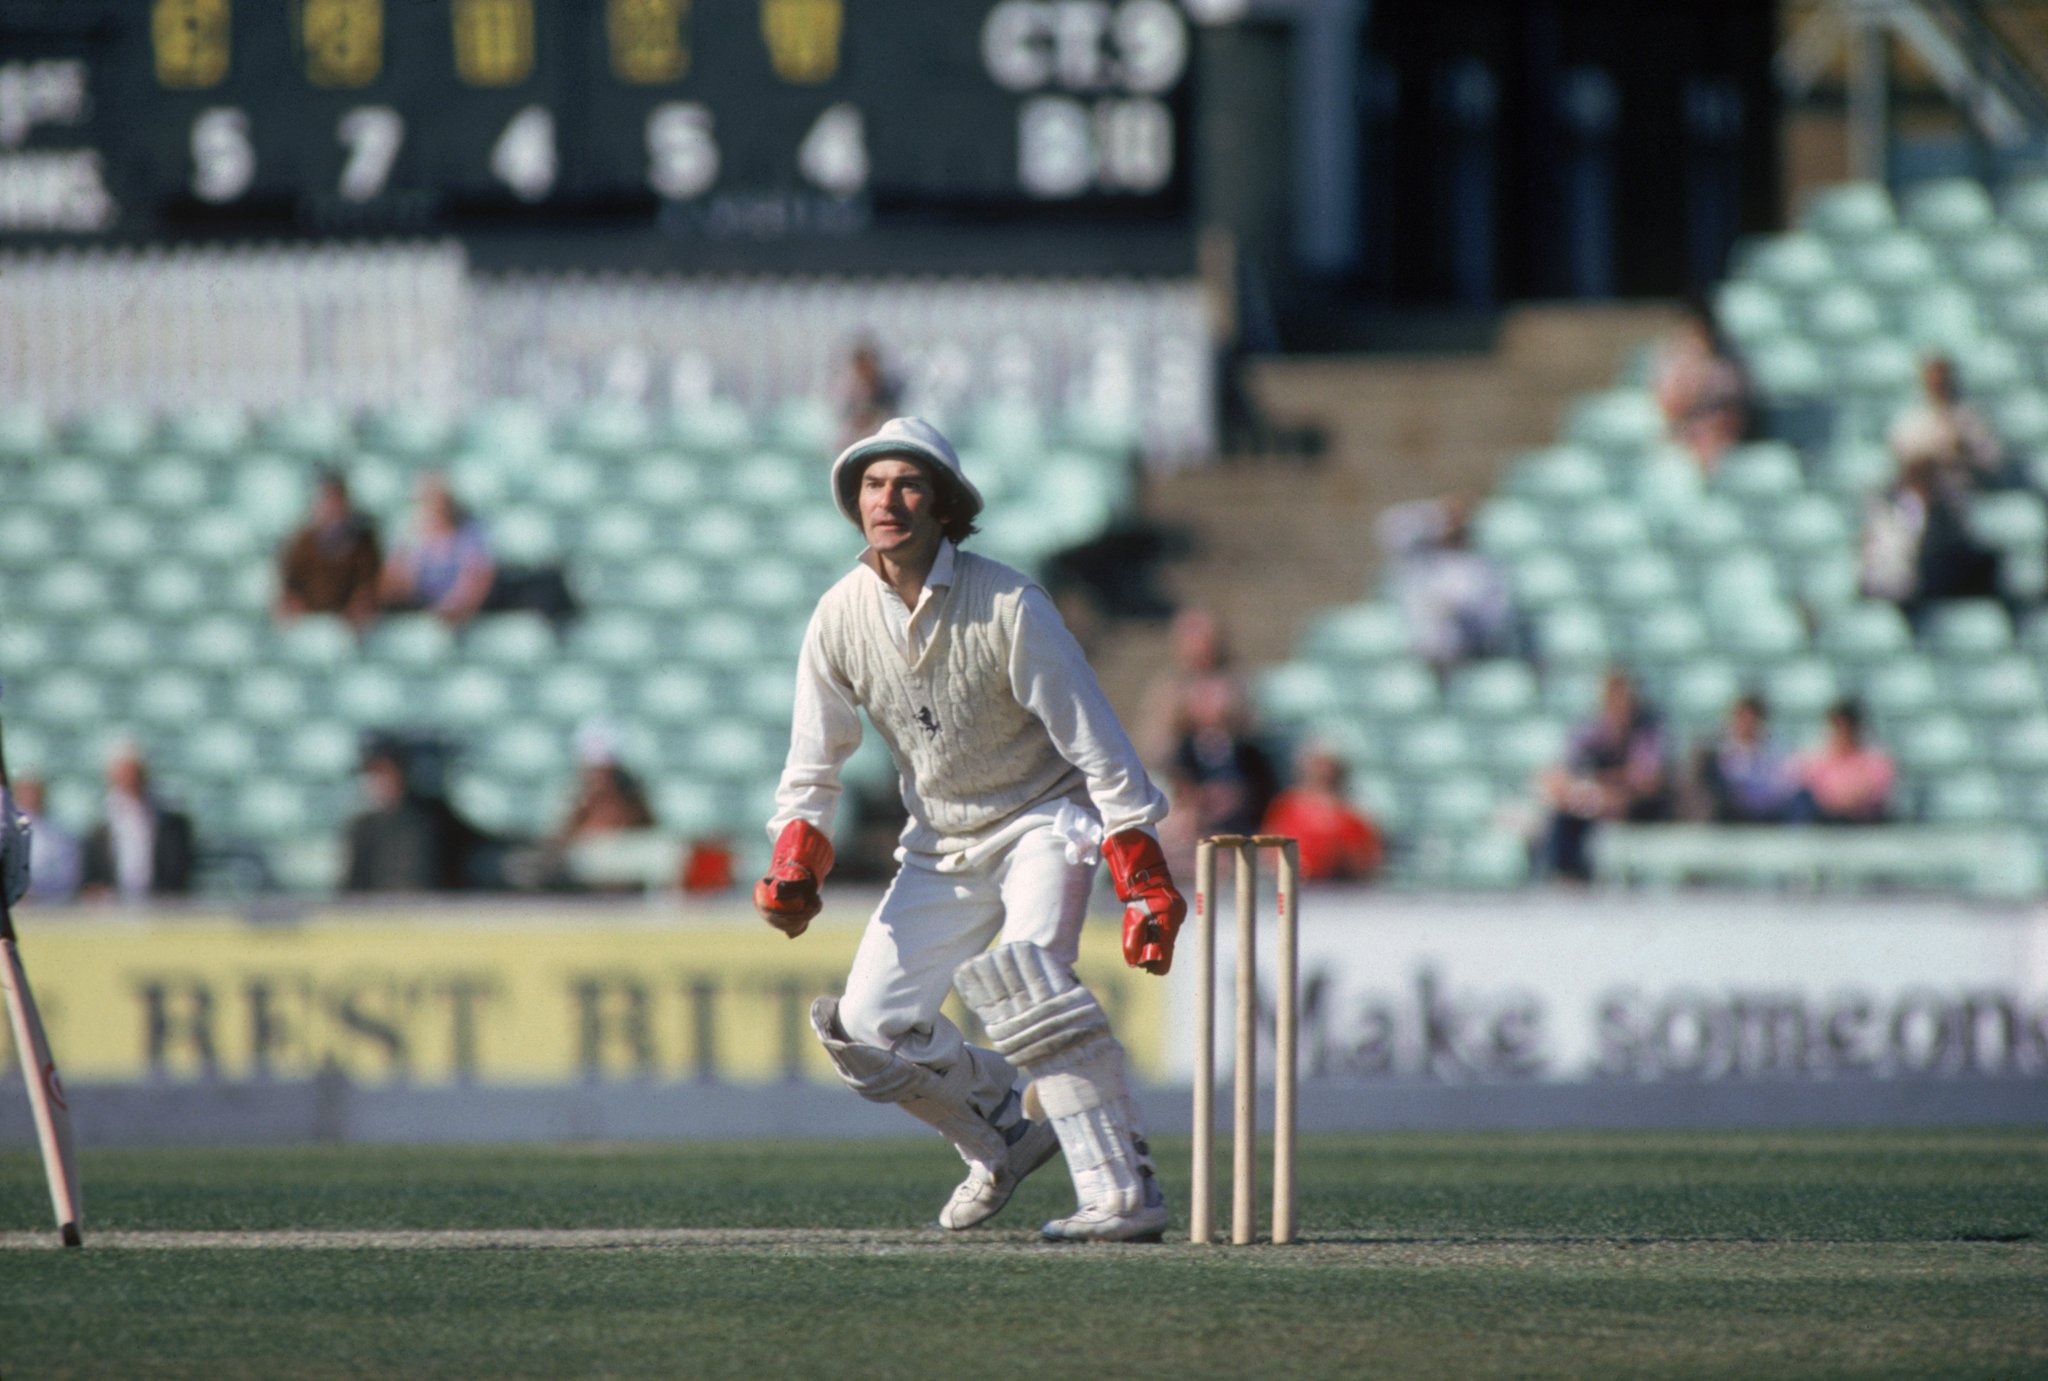 Happy 71st birthday to ICC Cricket Hall of Fame Member, Alan Knott! 